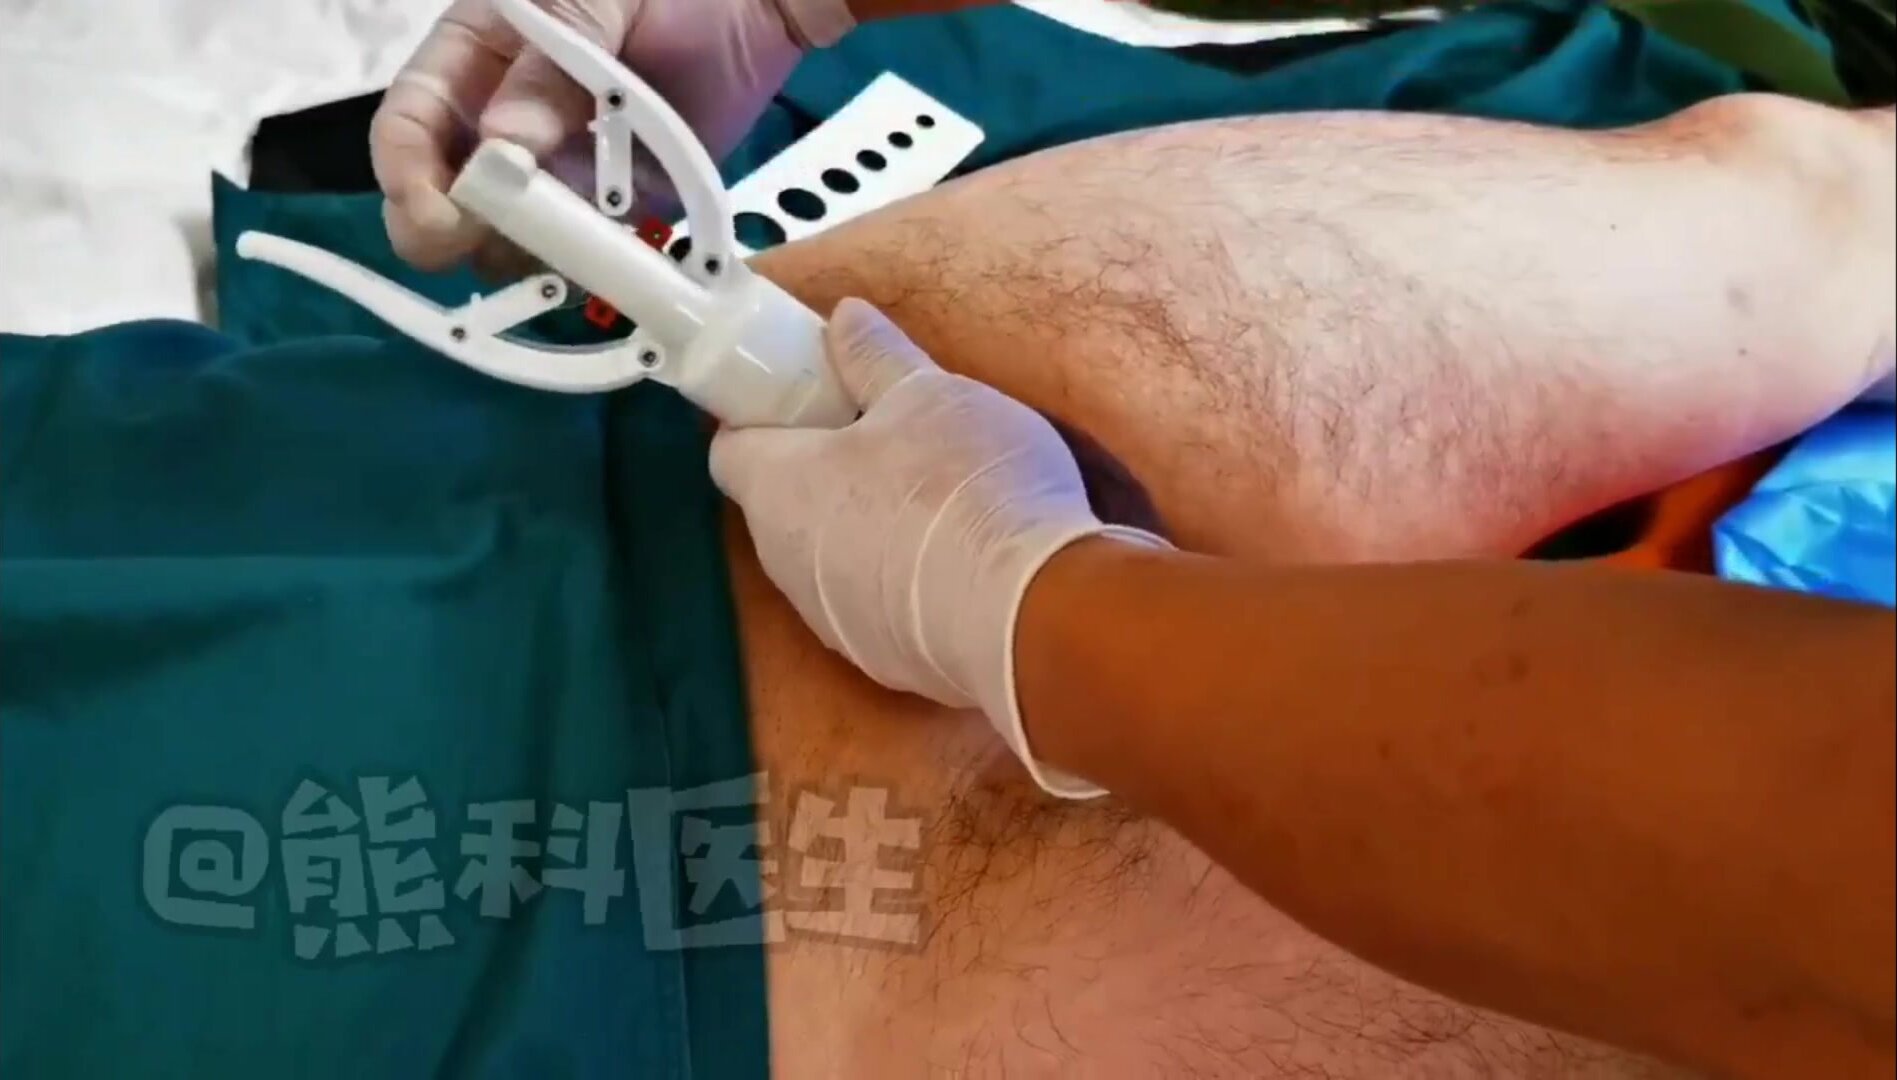 Circumcised Gang Bang - Stapler circumcision without anesthetic - ThisVid.com